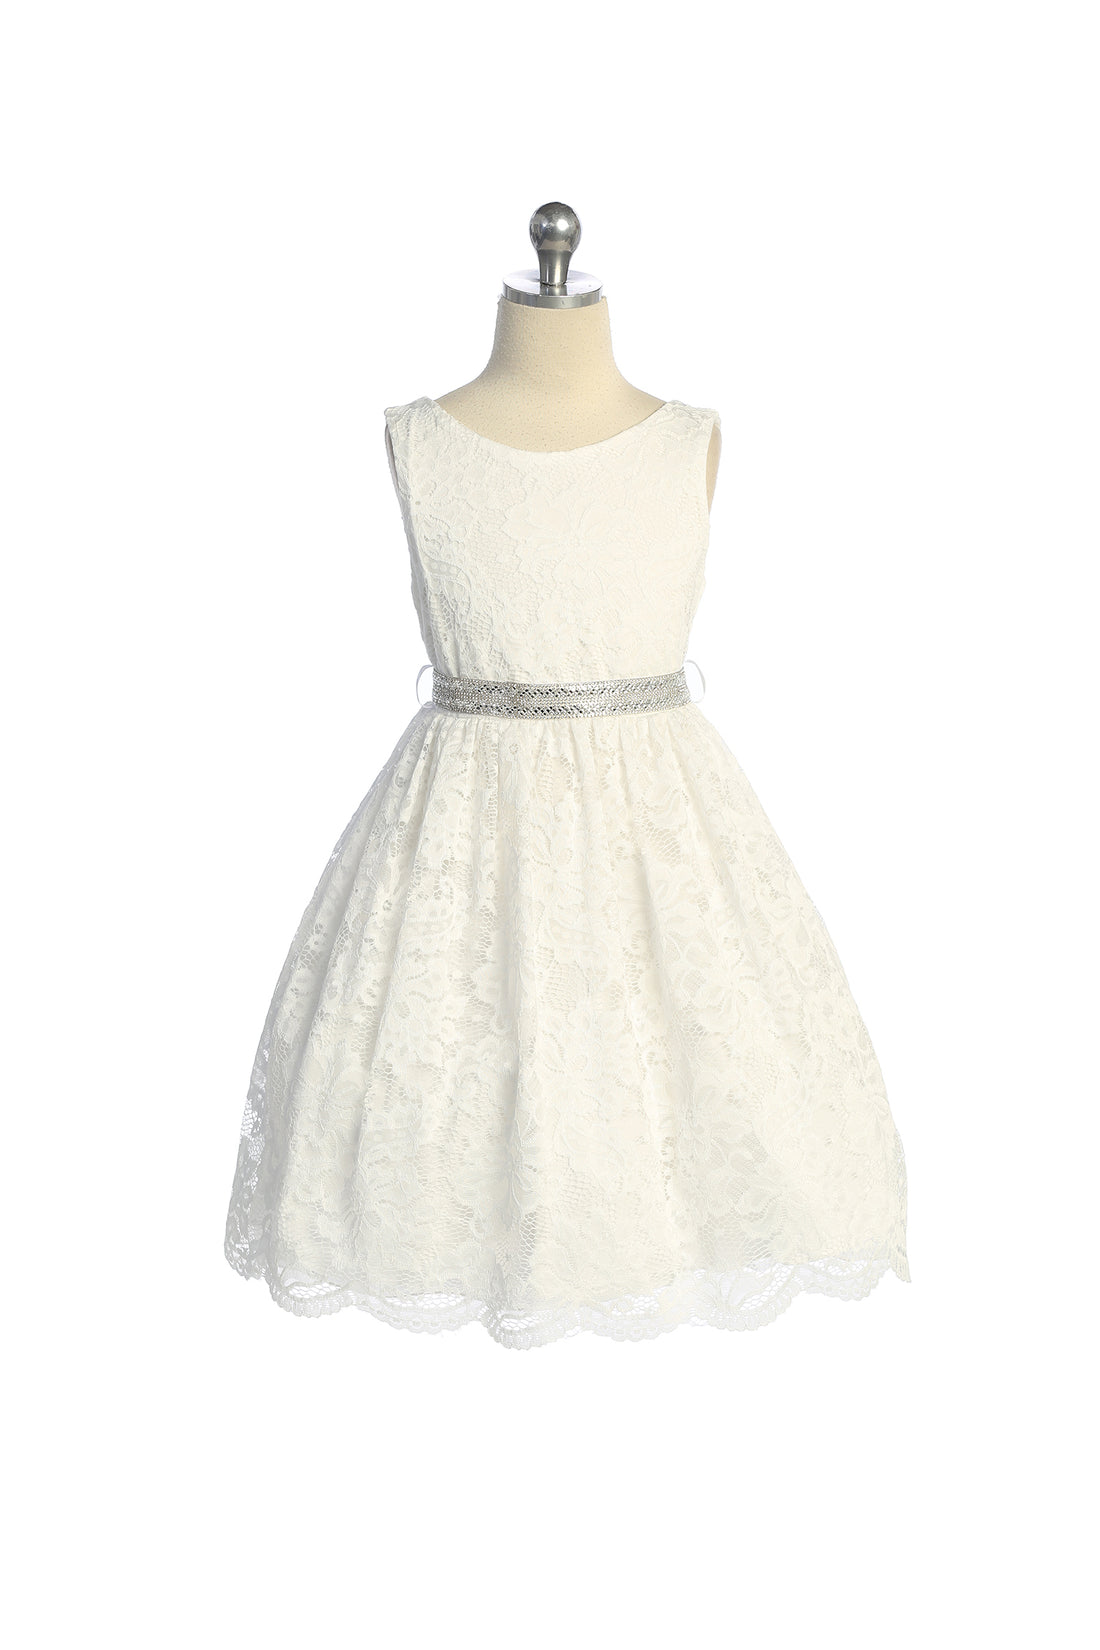 ivory formal/evening girl dress for party and wedding